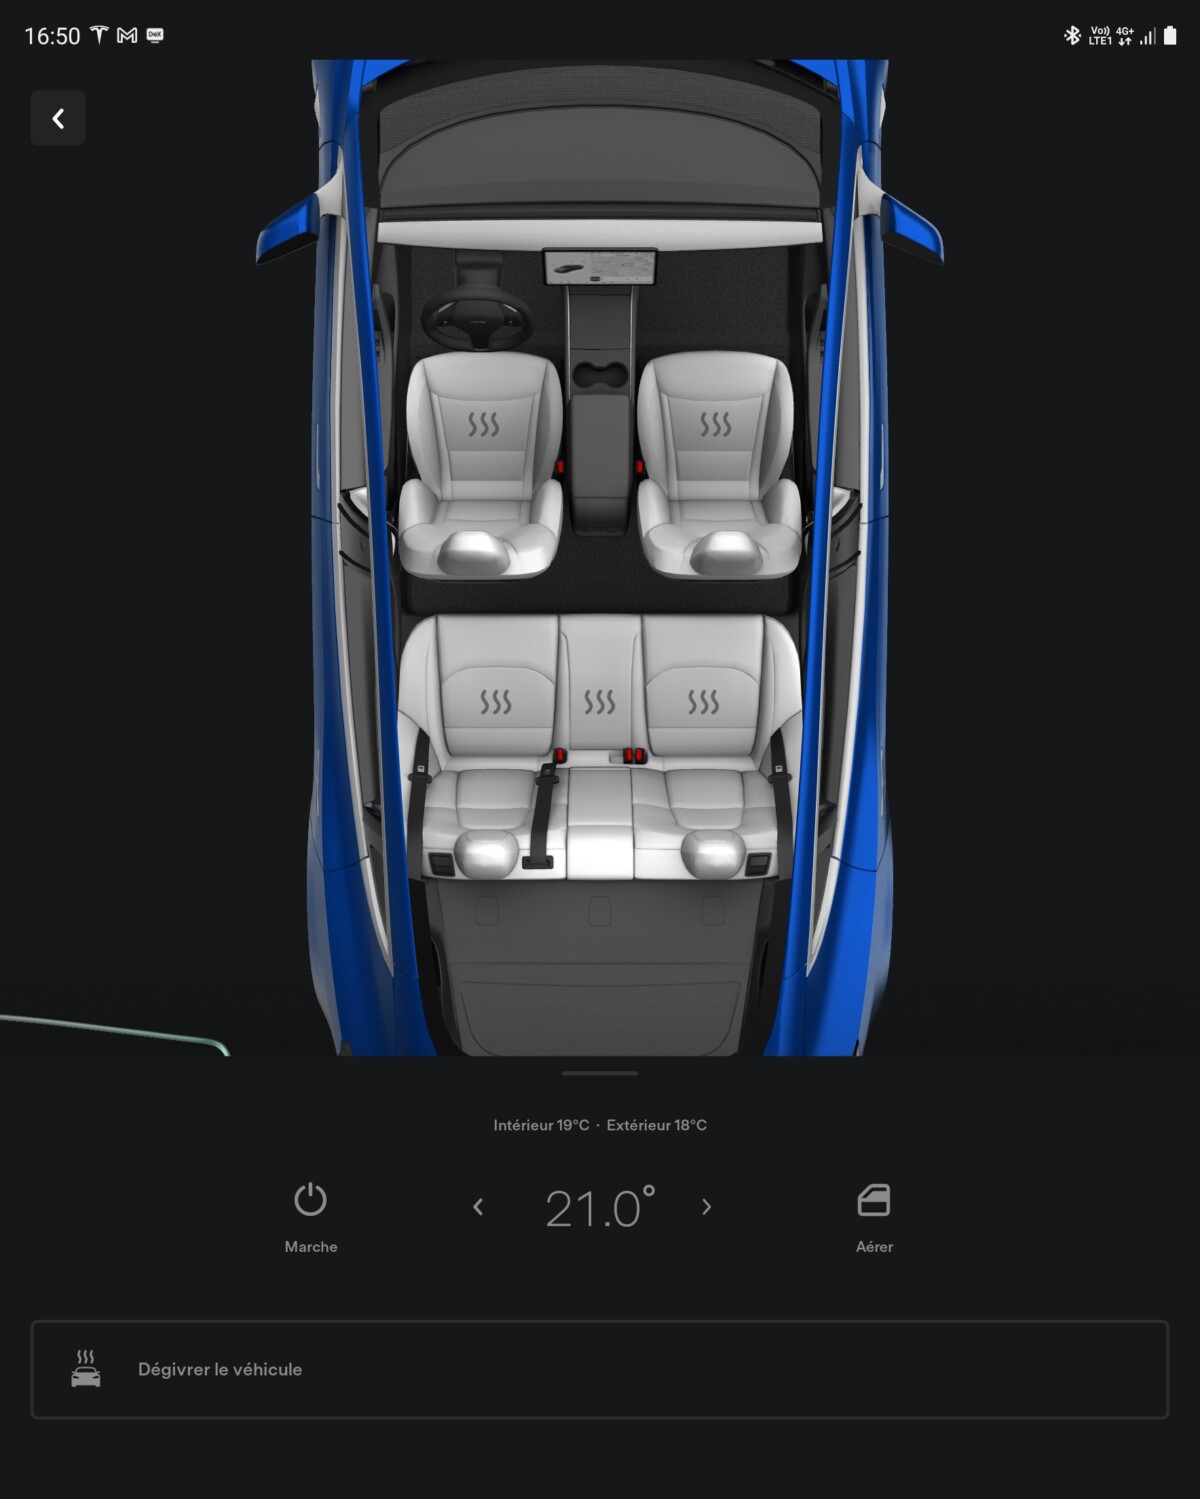 Heating control from the Tesla app